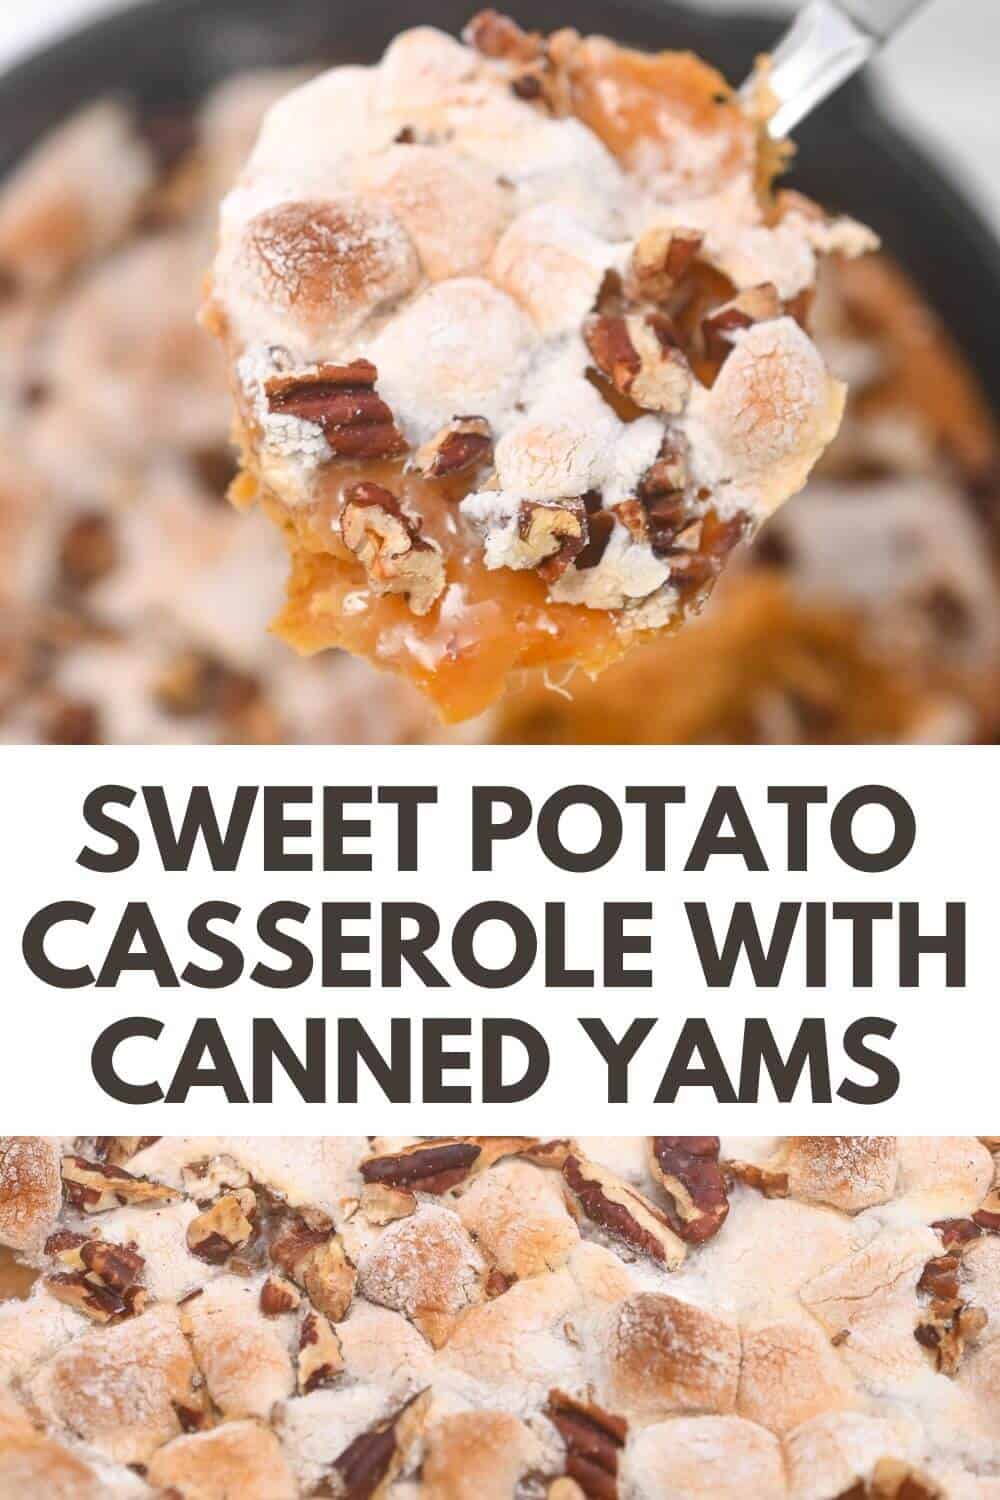 Sweet potato casserole made with canned yams is a delicious and comforting dish.